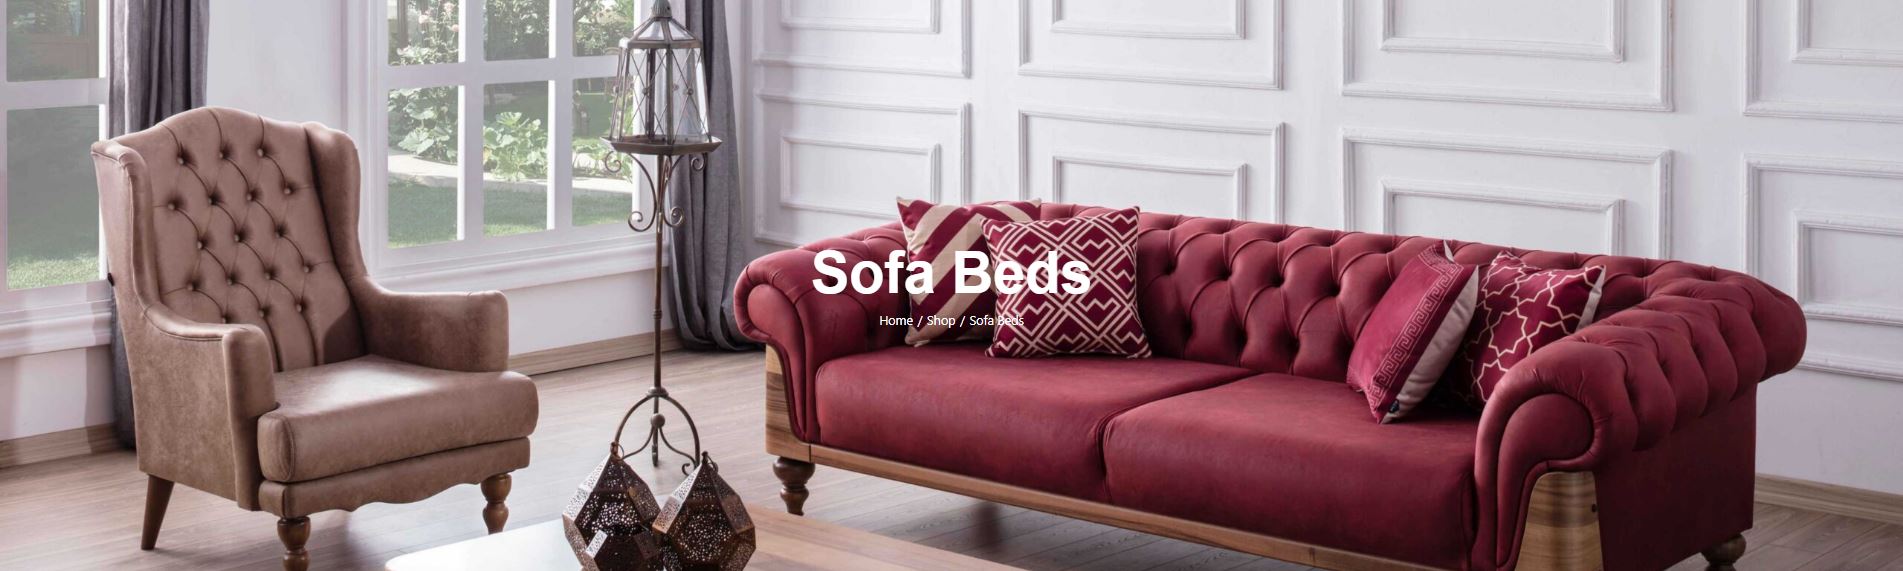 small sofa beds